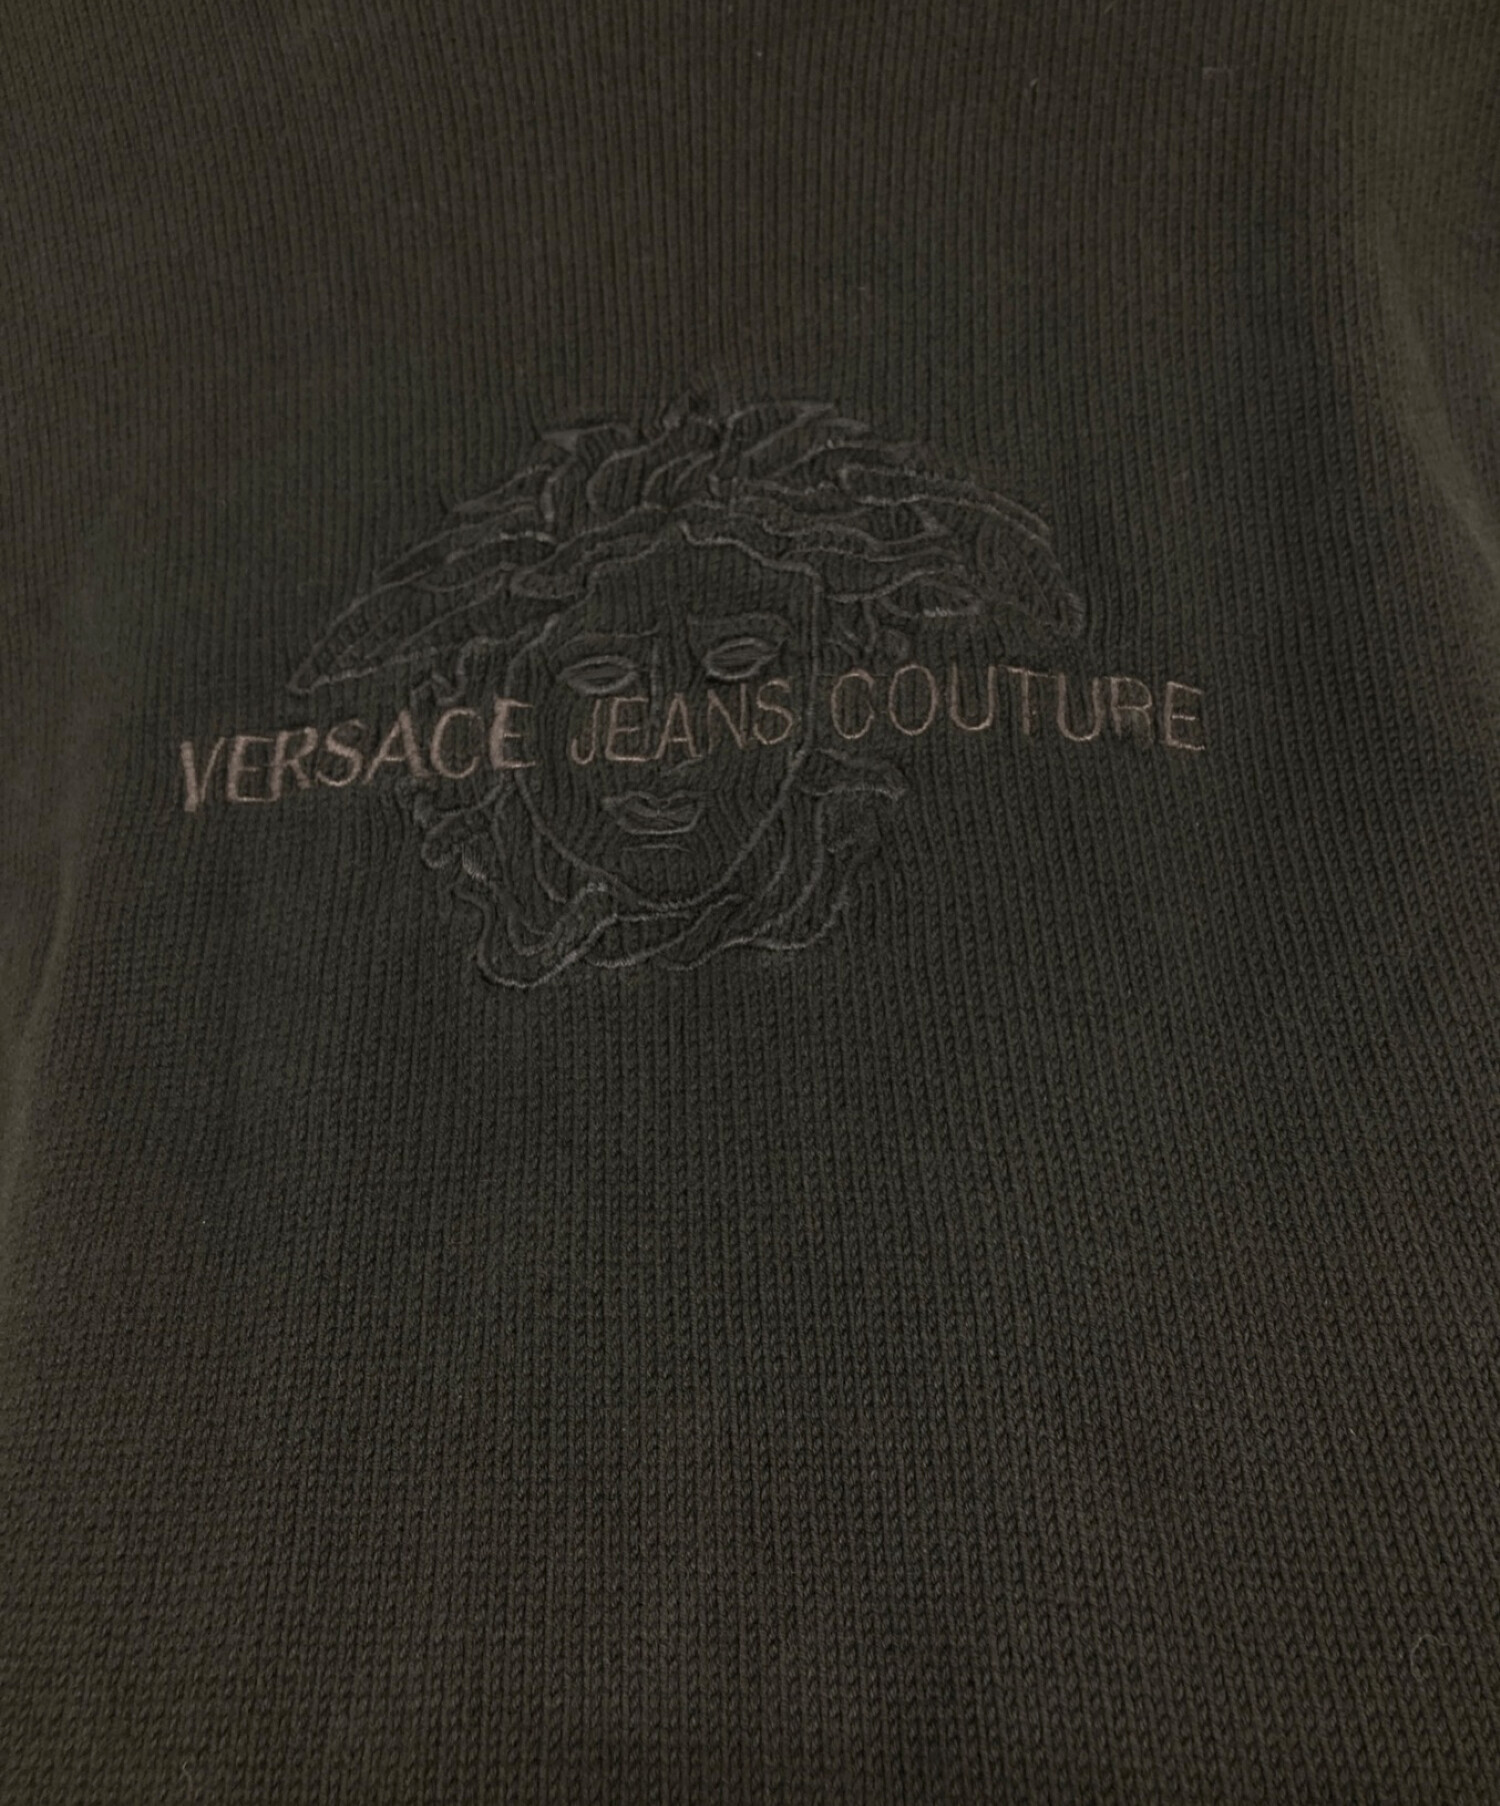 VERSACE JEANS COUTURE ニット　レザー　ワンピース26/40